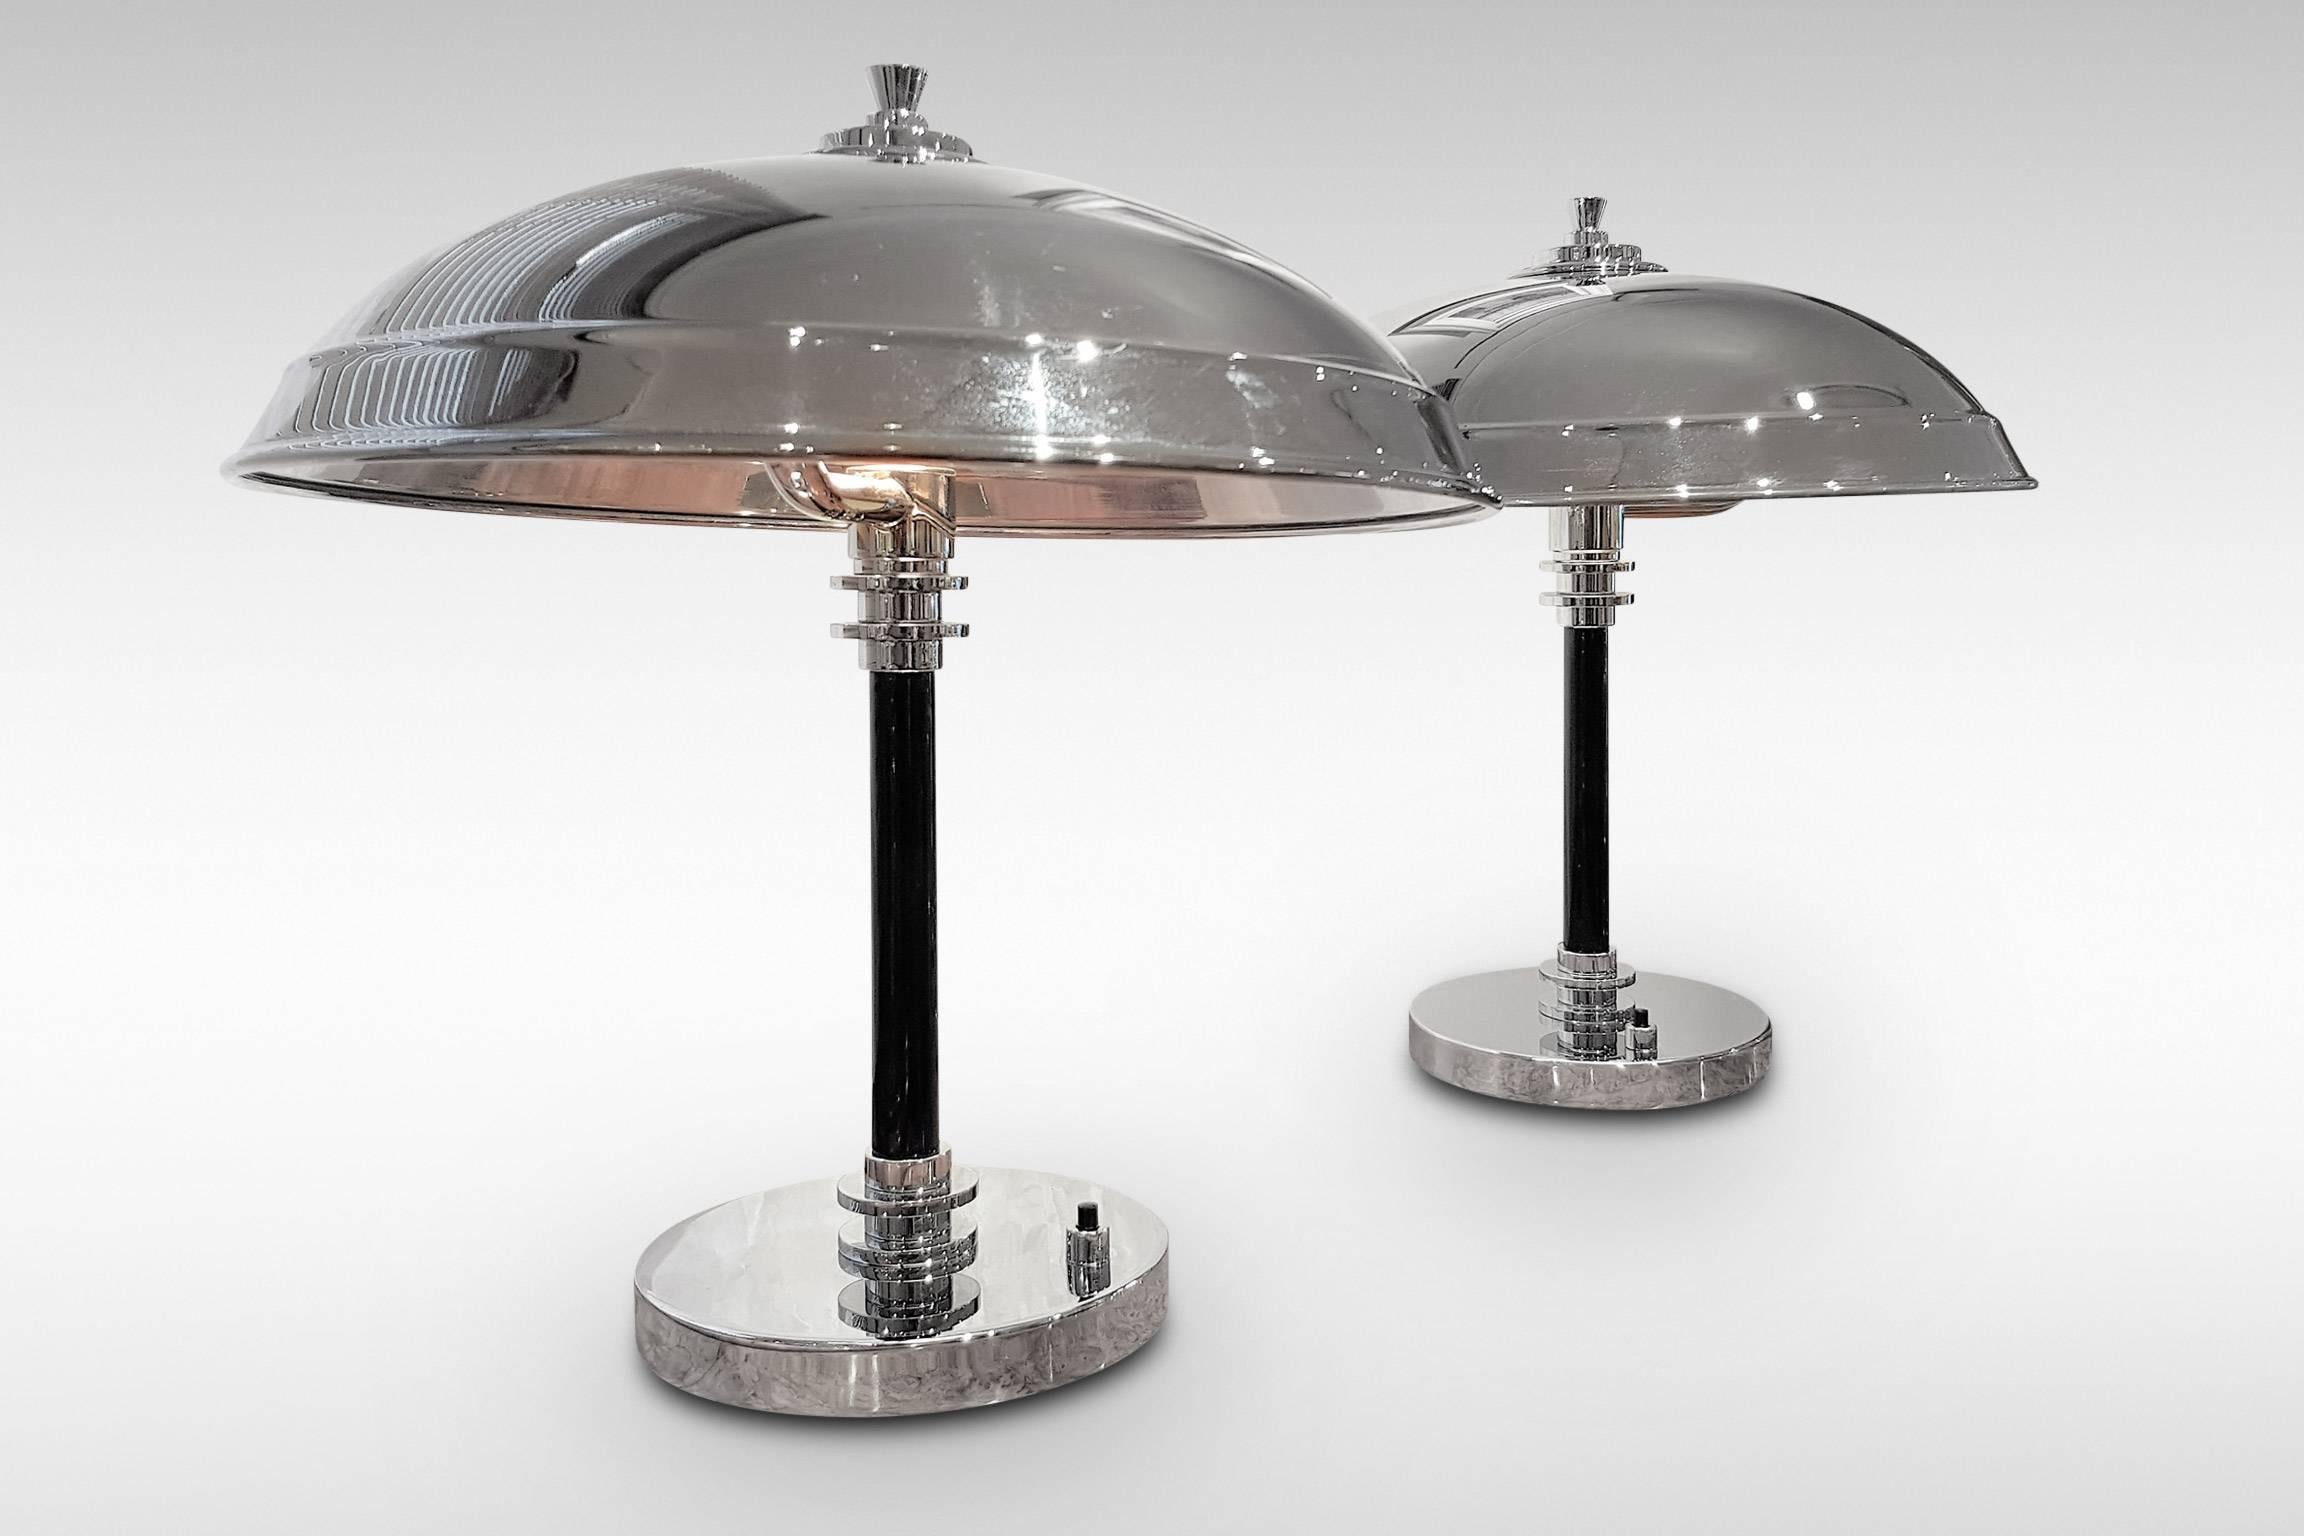 A stylish original pair of Art Deco dome lamps with deep blue Erinoid columns on a chrome base and with chrome ring detailing. Erinoid was the brand name of a pioneering plastic similar to bakelite,
circa 1930s-1950s
Fully refurbished, rewired and